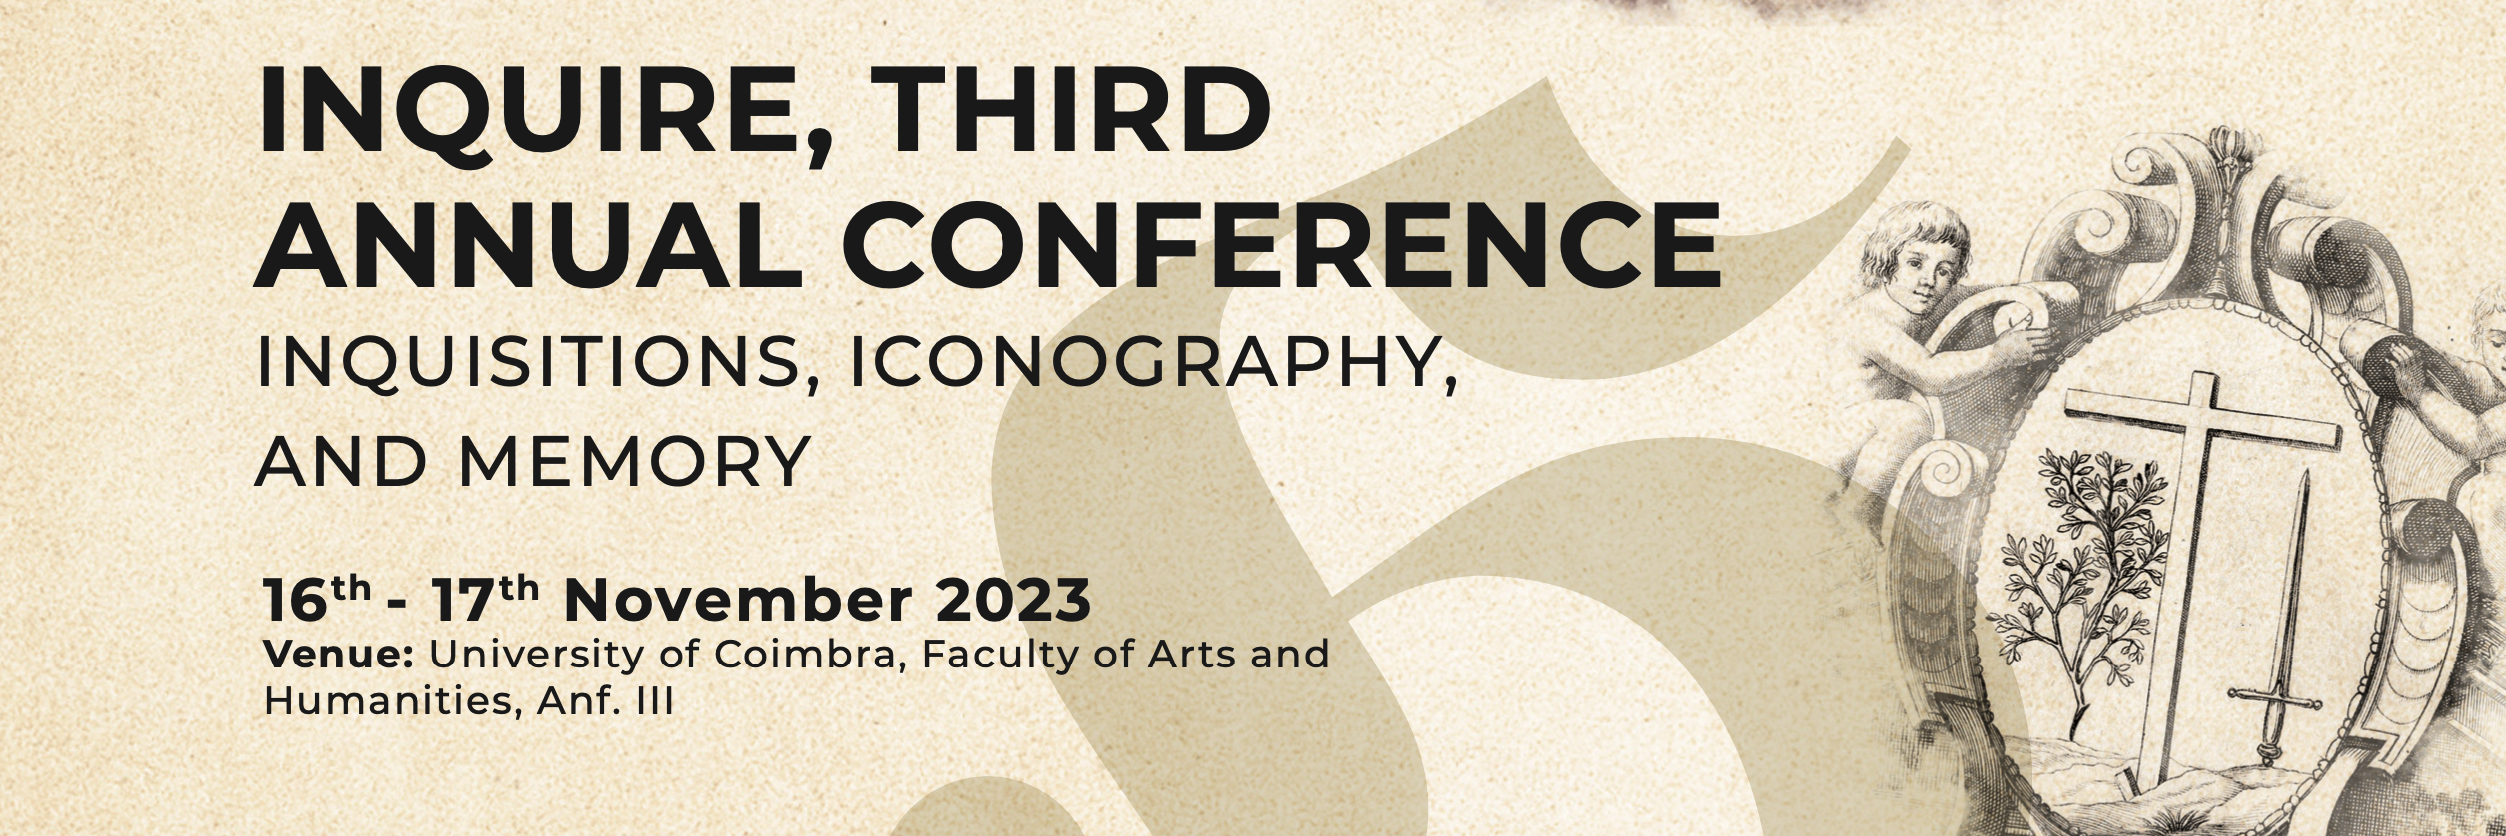 Inquire, Third Annual Conference: Inquisitions, iconography and memory